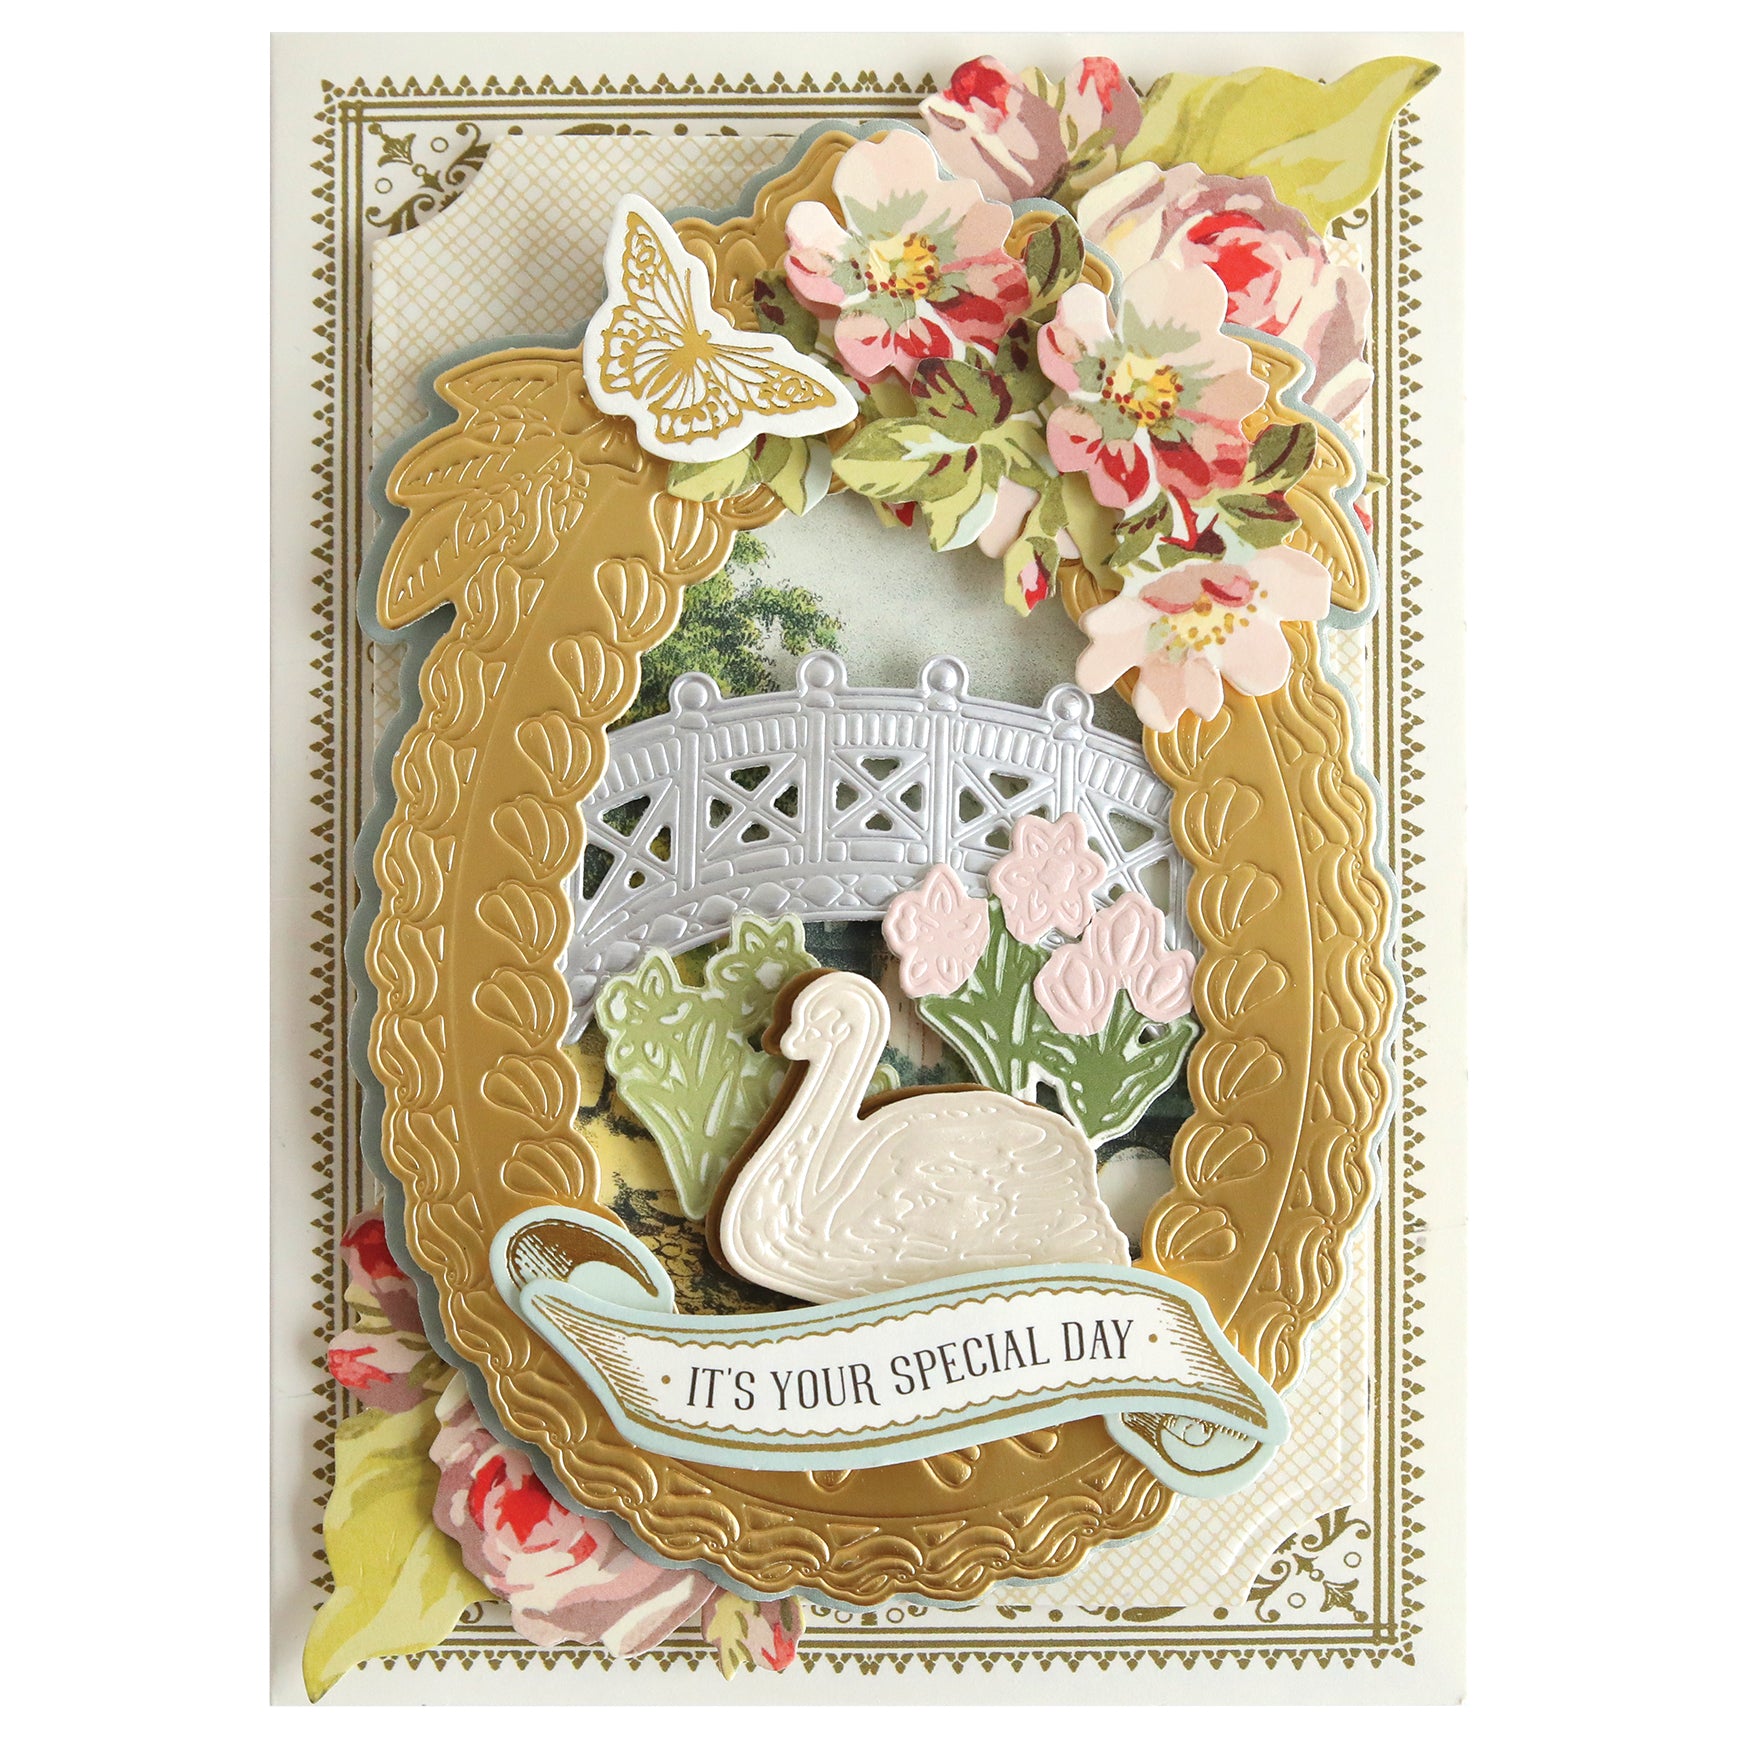 a card with a swan and flowers on it.